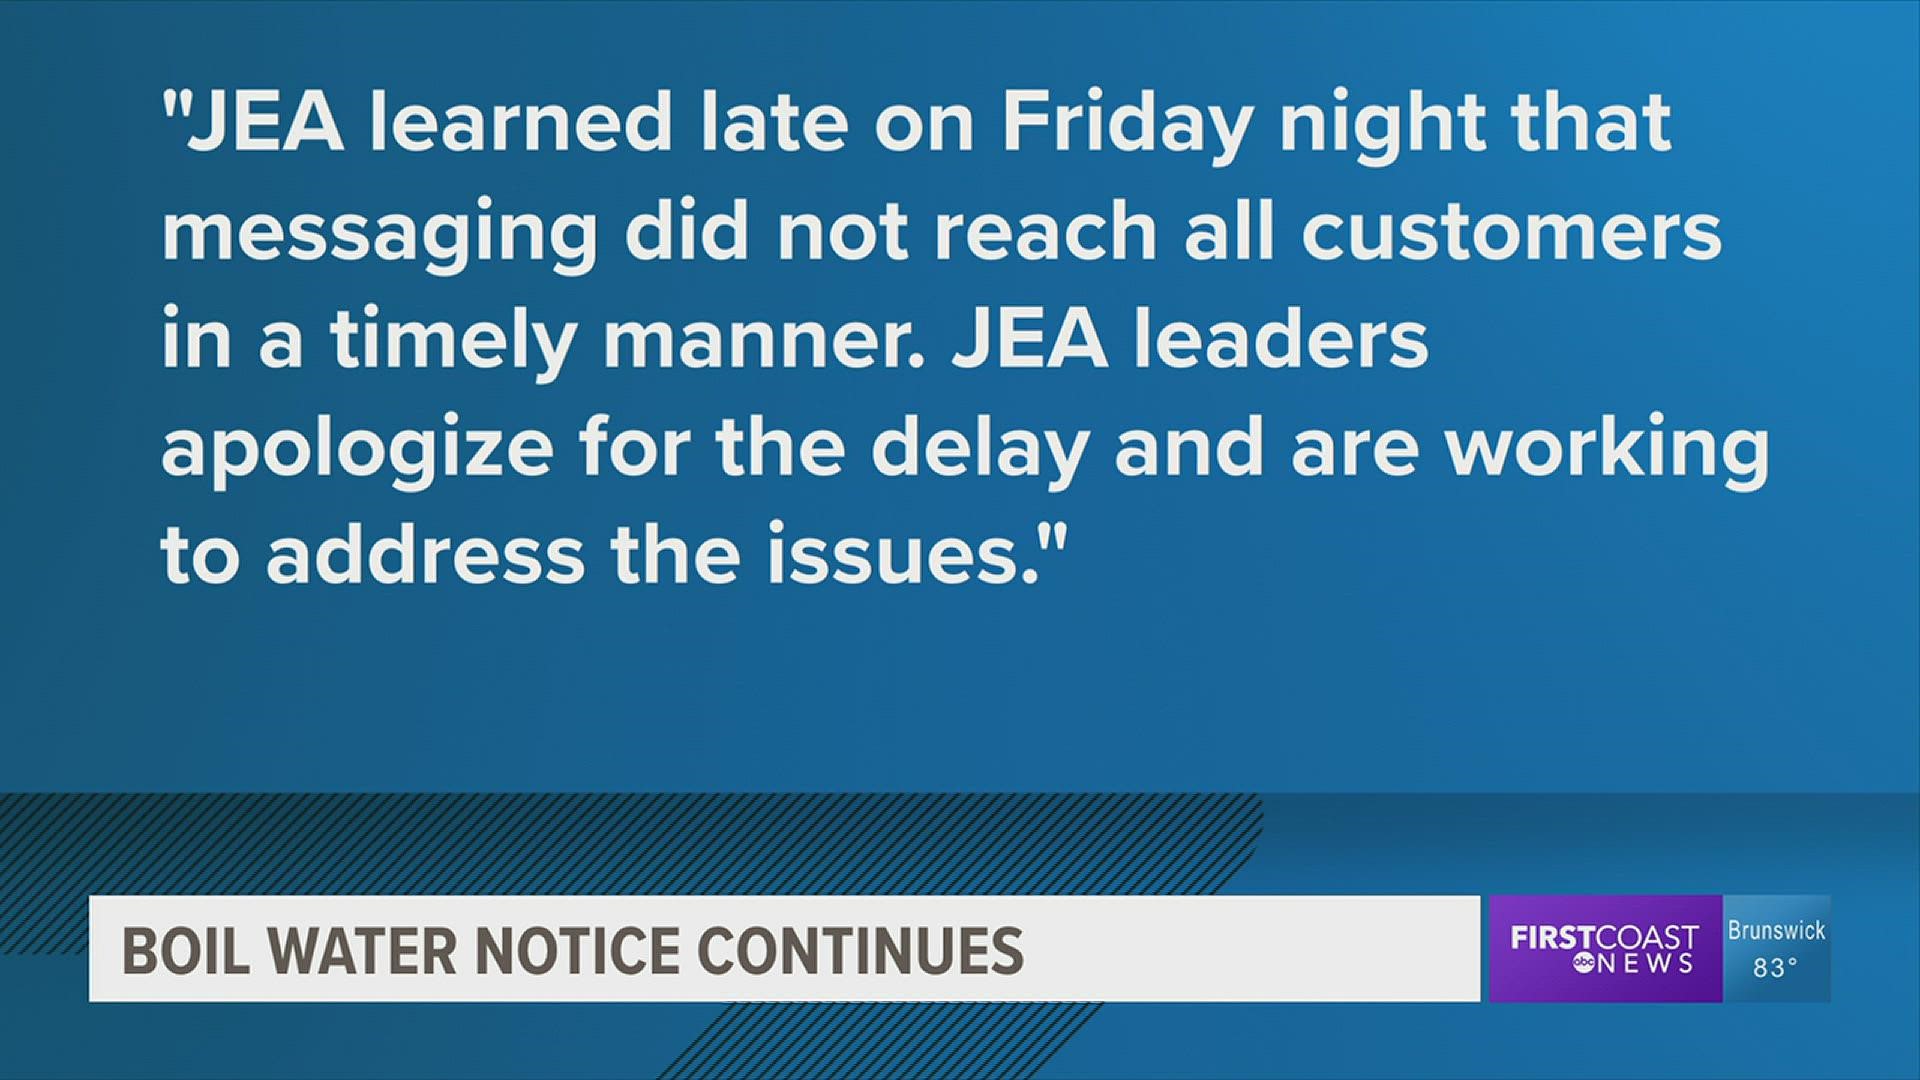 JEA notified customers of a boil water notice for the St. Johns Town Center and Tinsel Town districts Friday. A new statement says the notice was delayed.